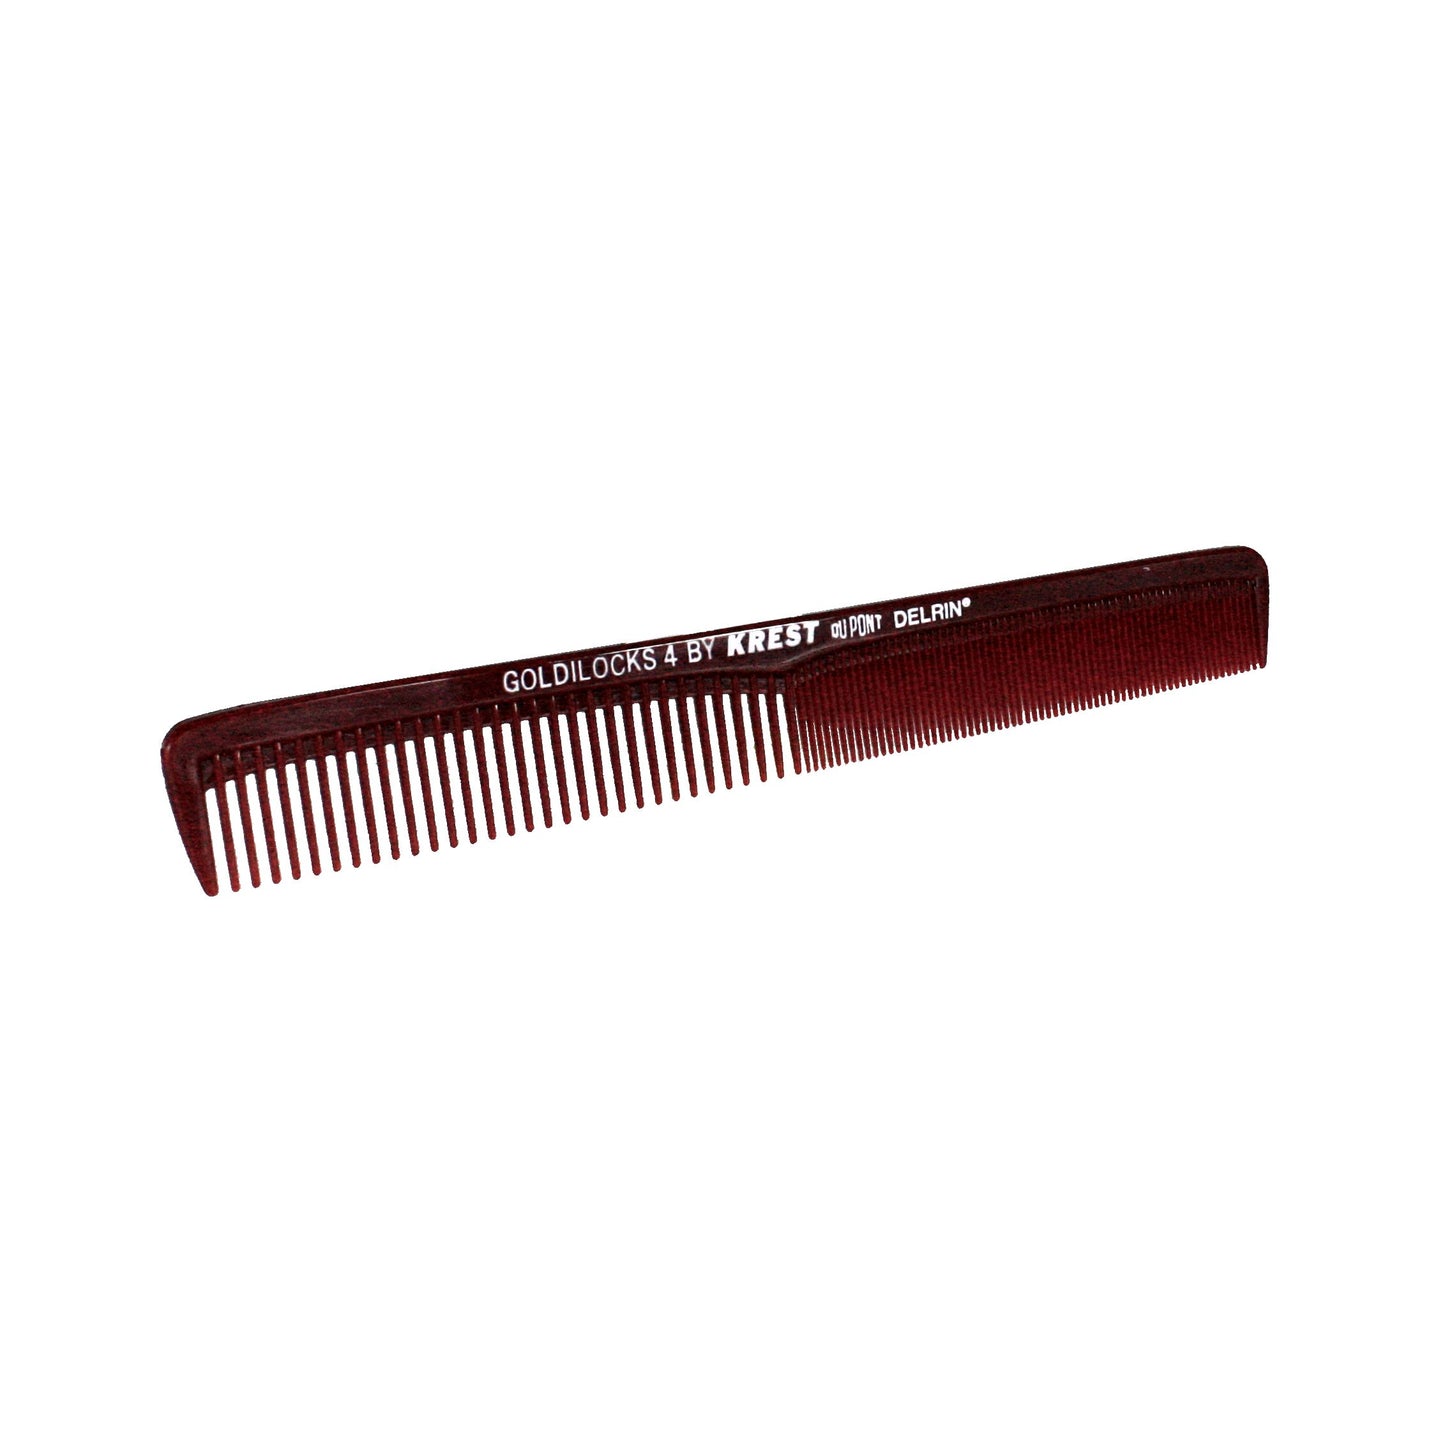 7in, Delrin Plastic, Styling Comb - CLOSEOUT, LIMITED STOCK AVAILABLE